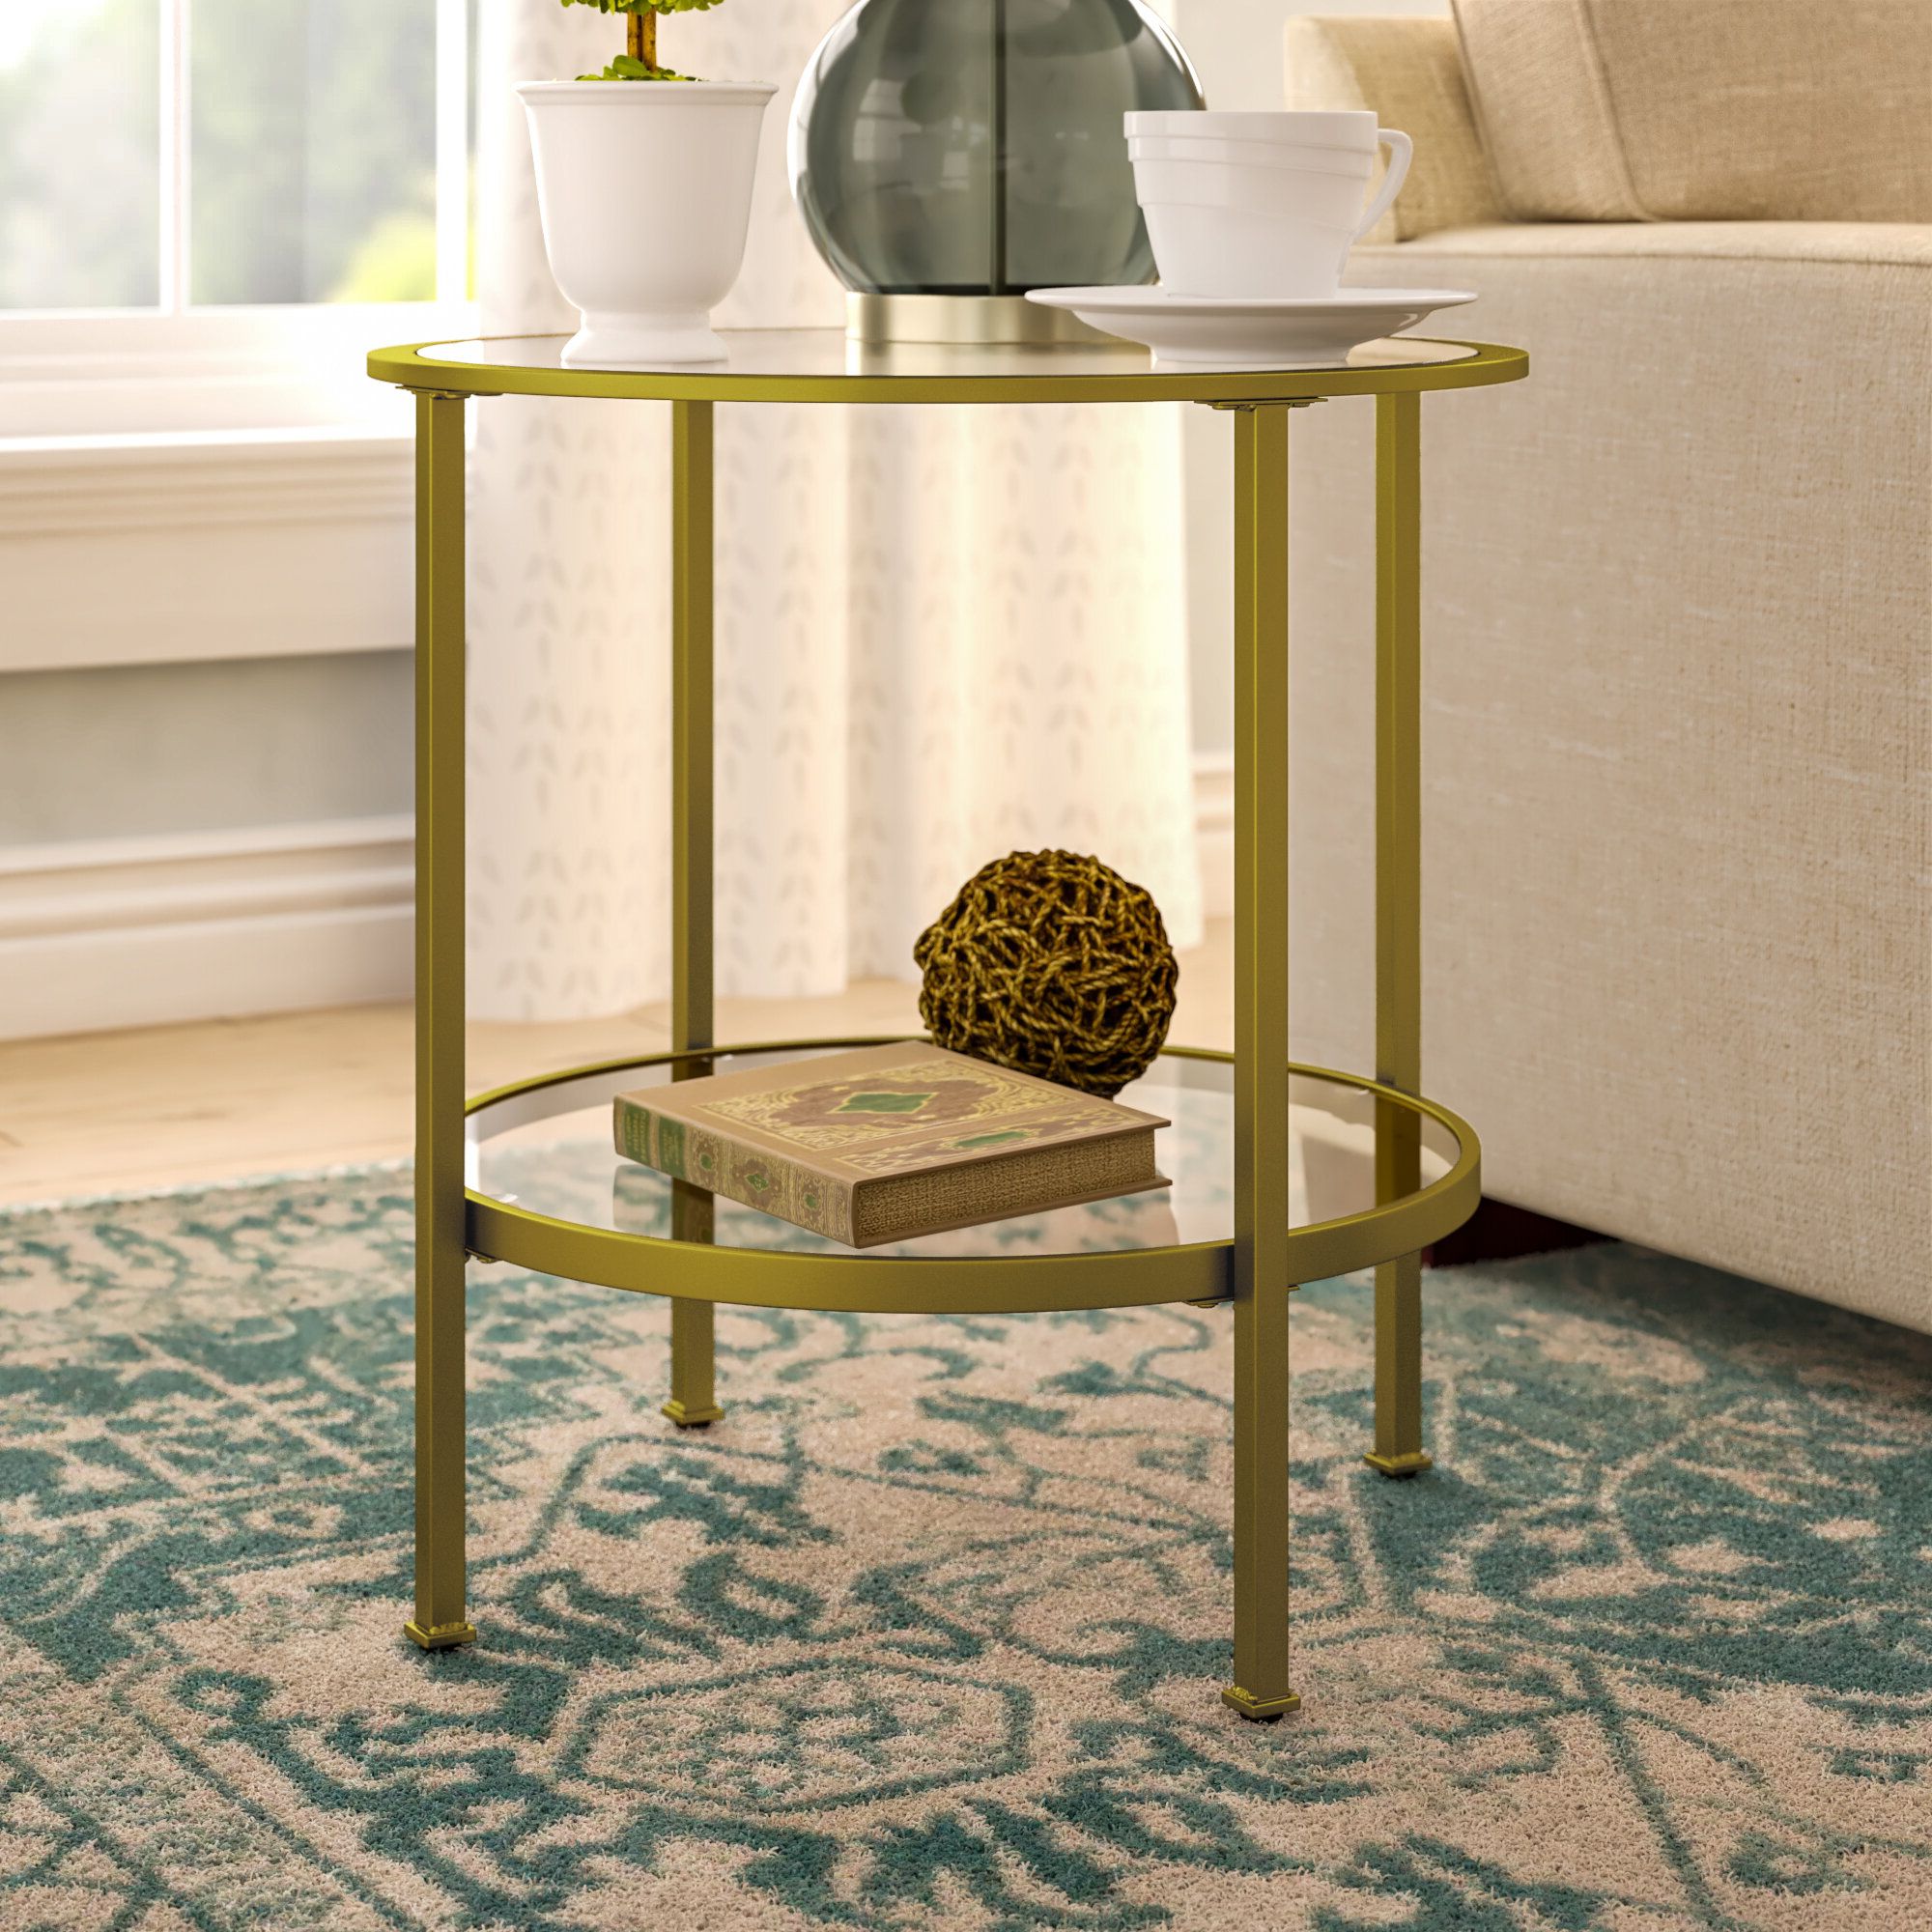 Favorite Porch & Den Urqhuart Wood Glass Coffee Tables With Glass End Tables You'll Love In  (View 15 of 20)